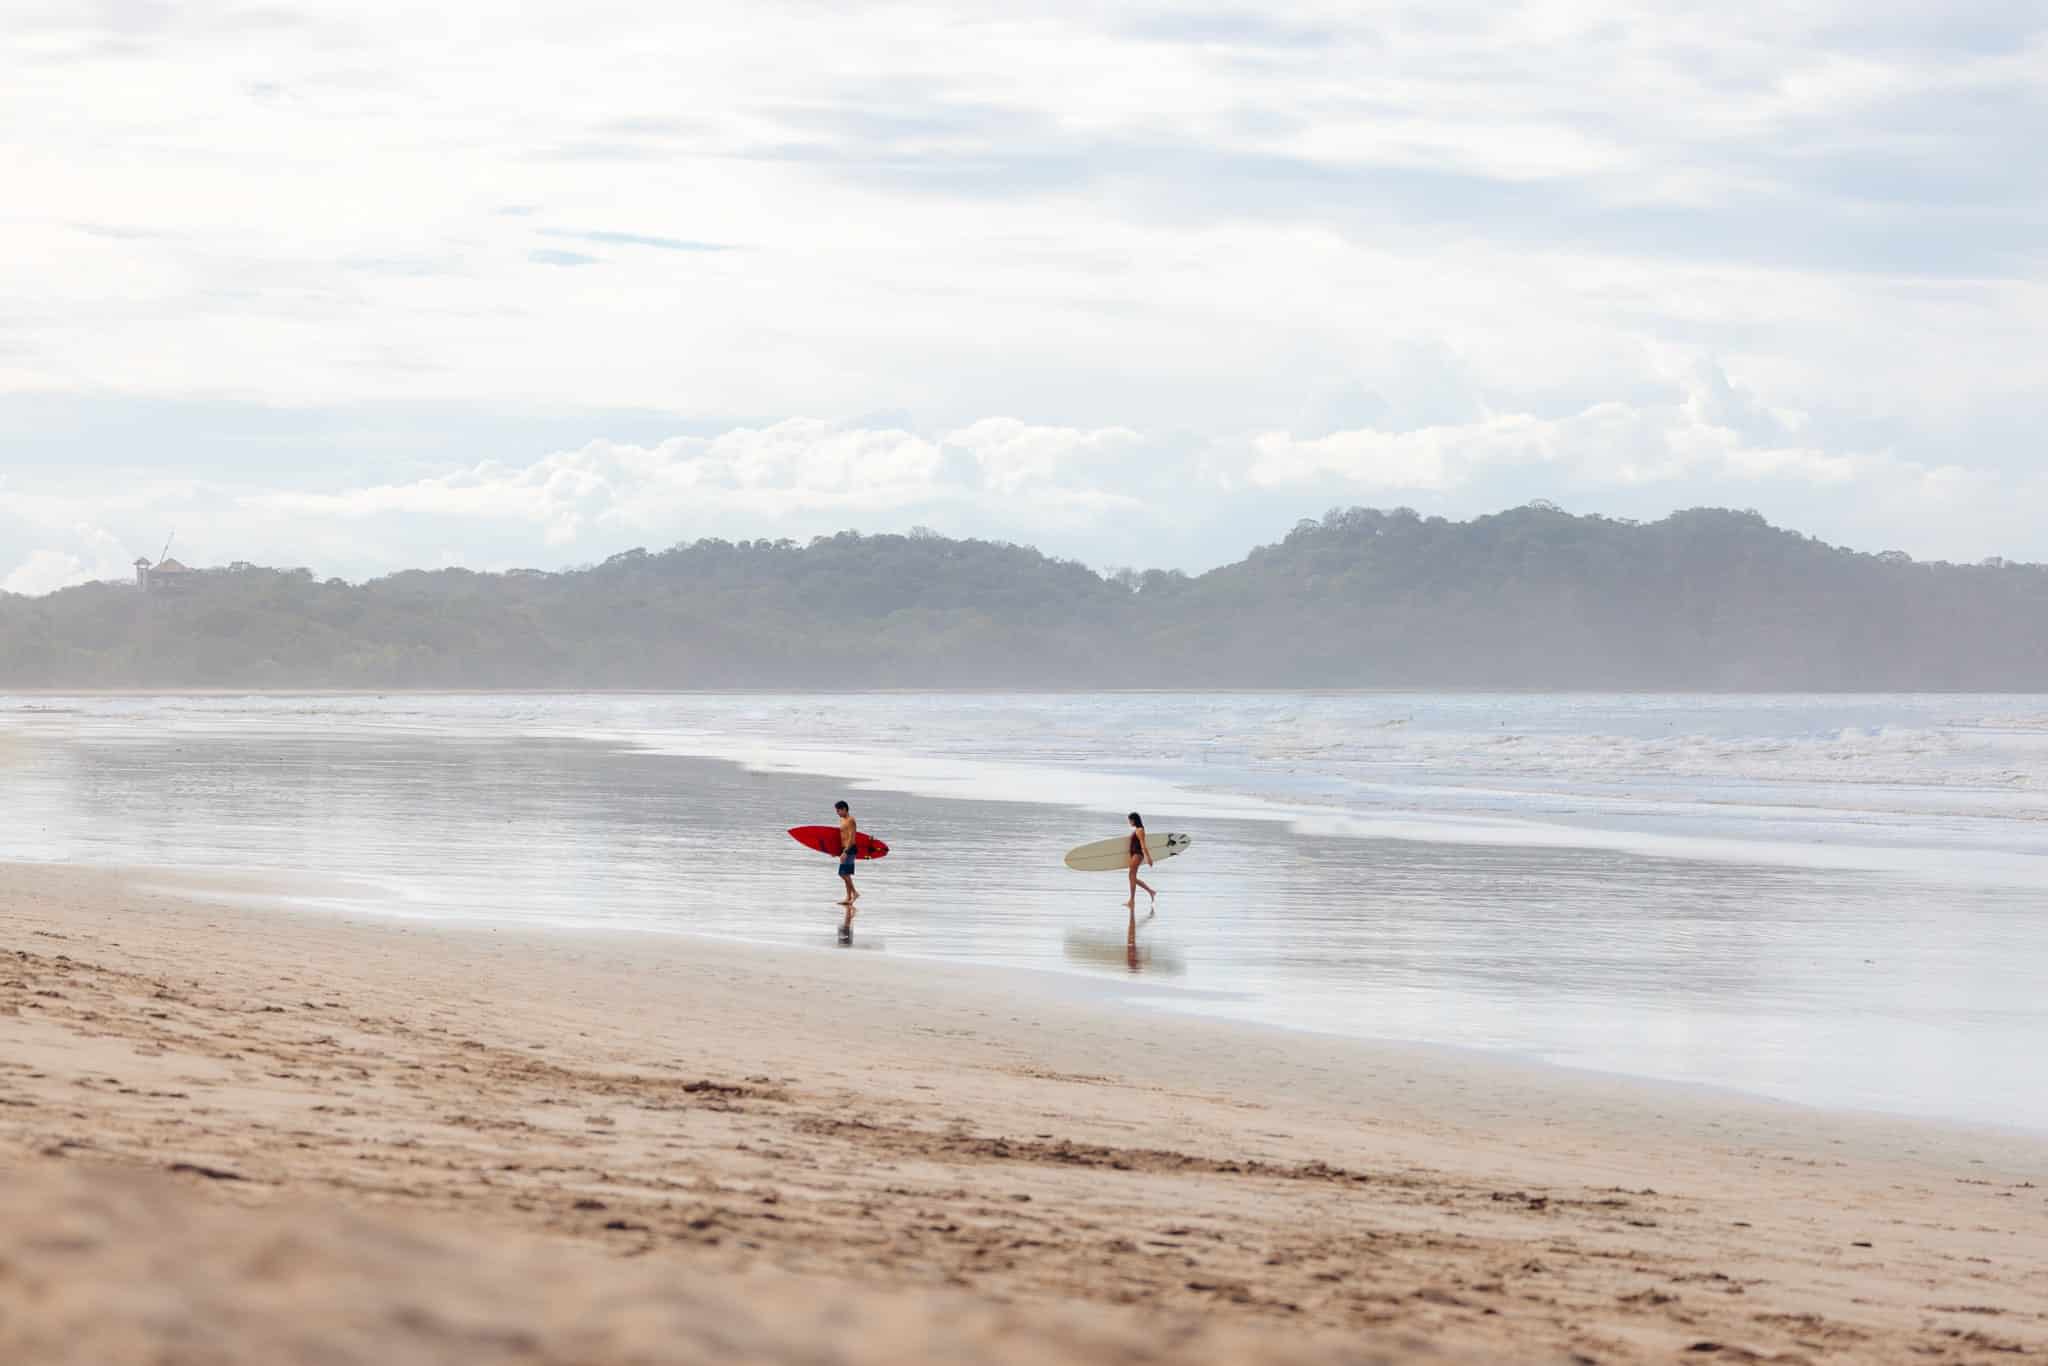 Surfers on the beach in Costa Rica